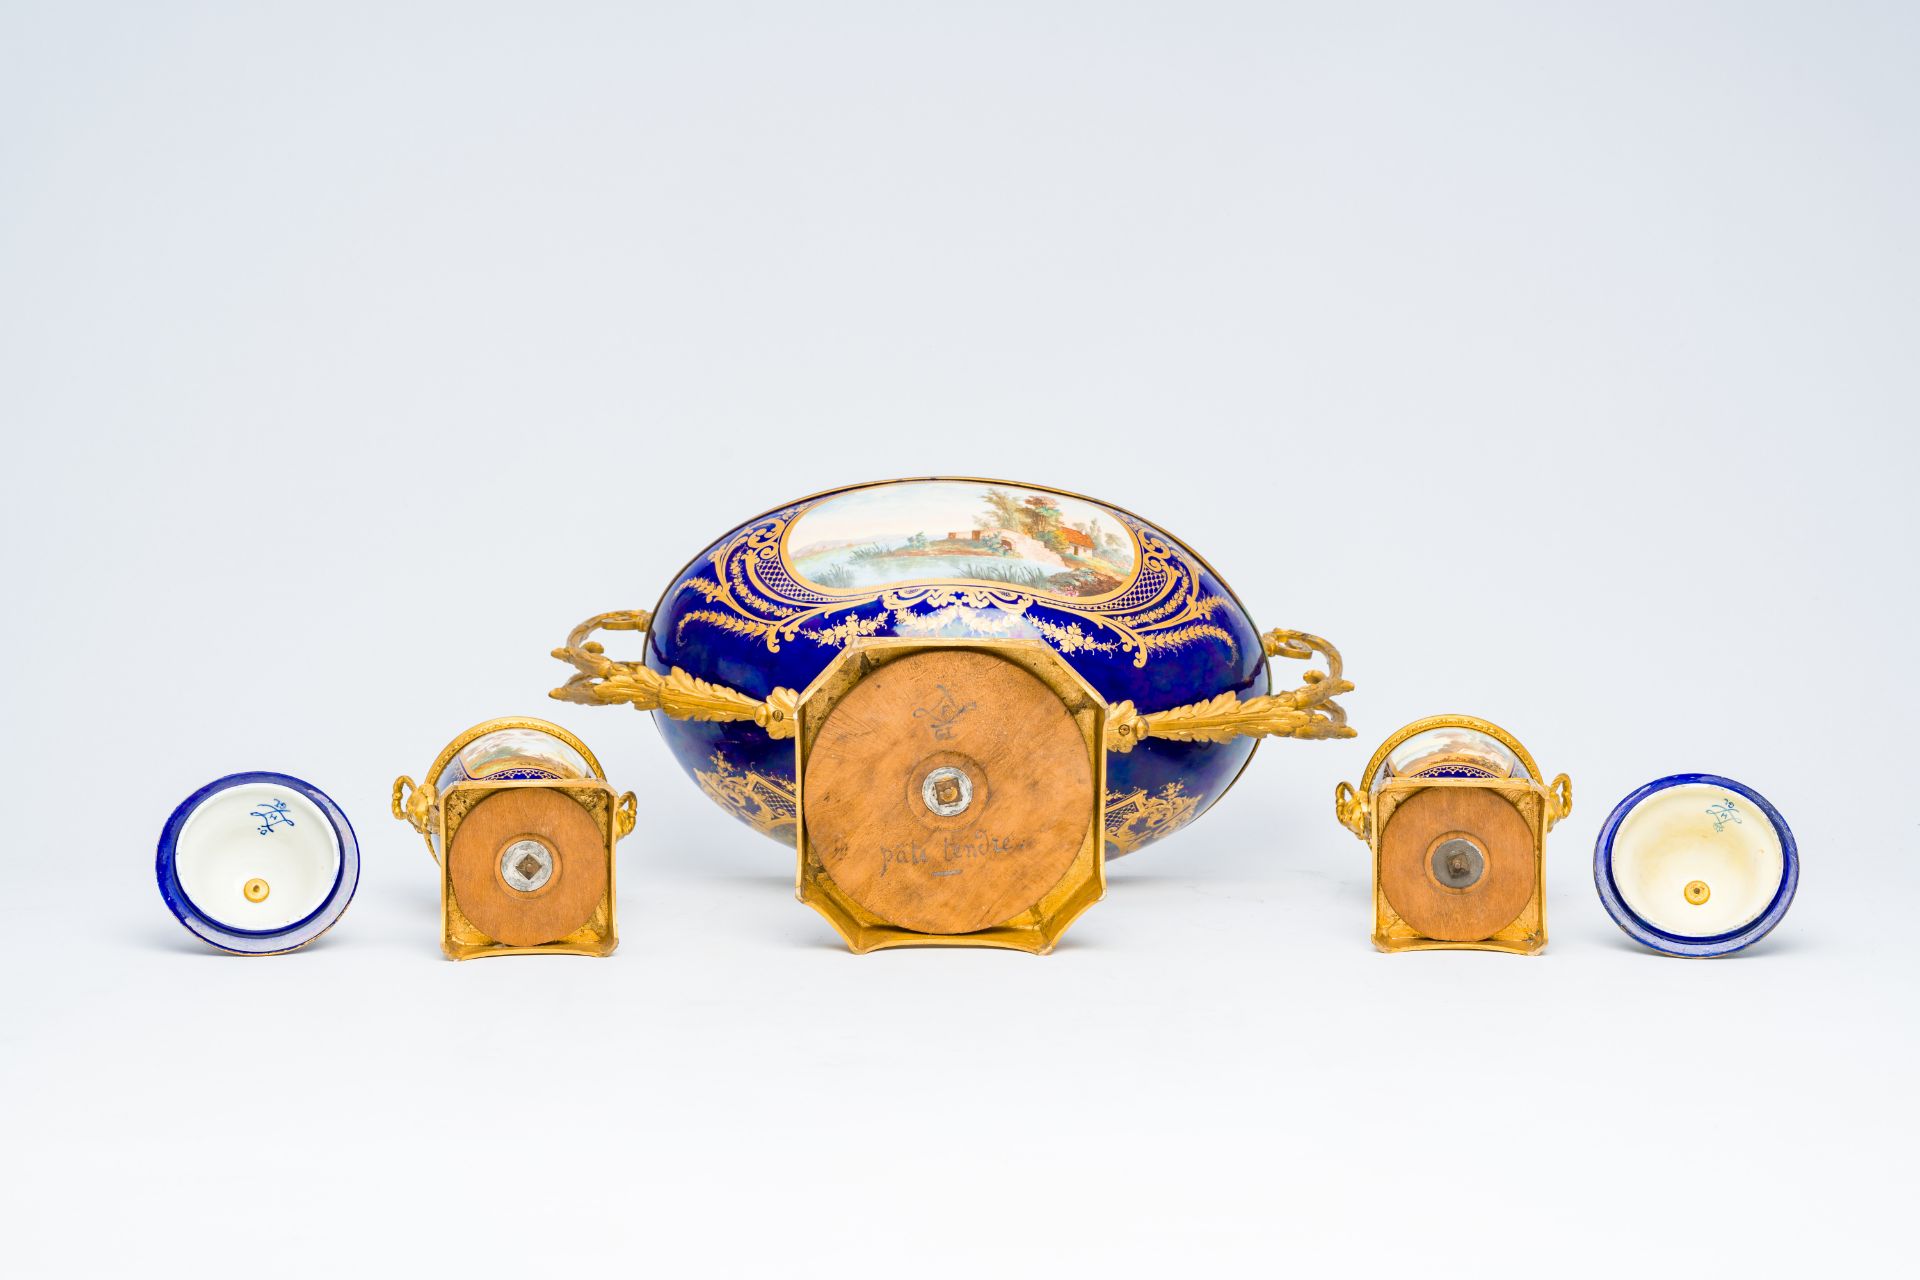 A three piece Sevres-style porcelain garniture with gilt bronze mounts, France, 19th C. - Image 6 of 7